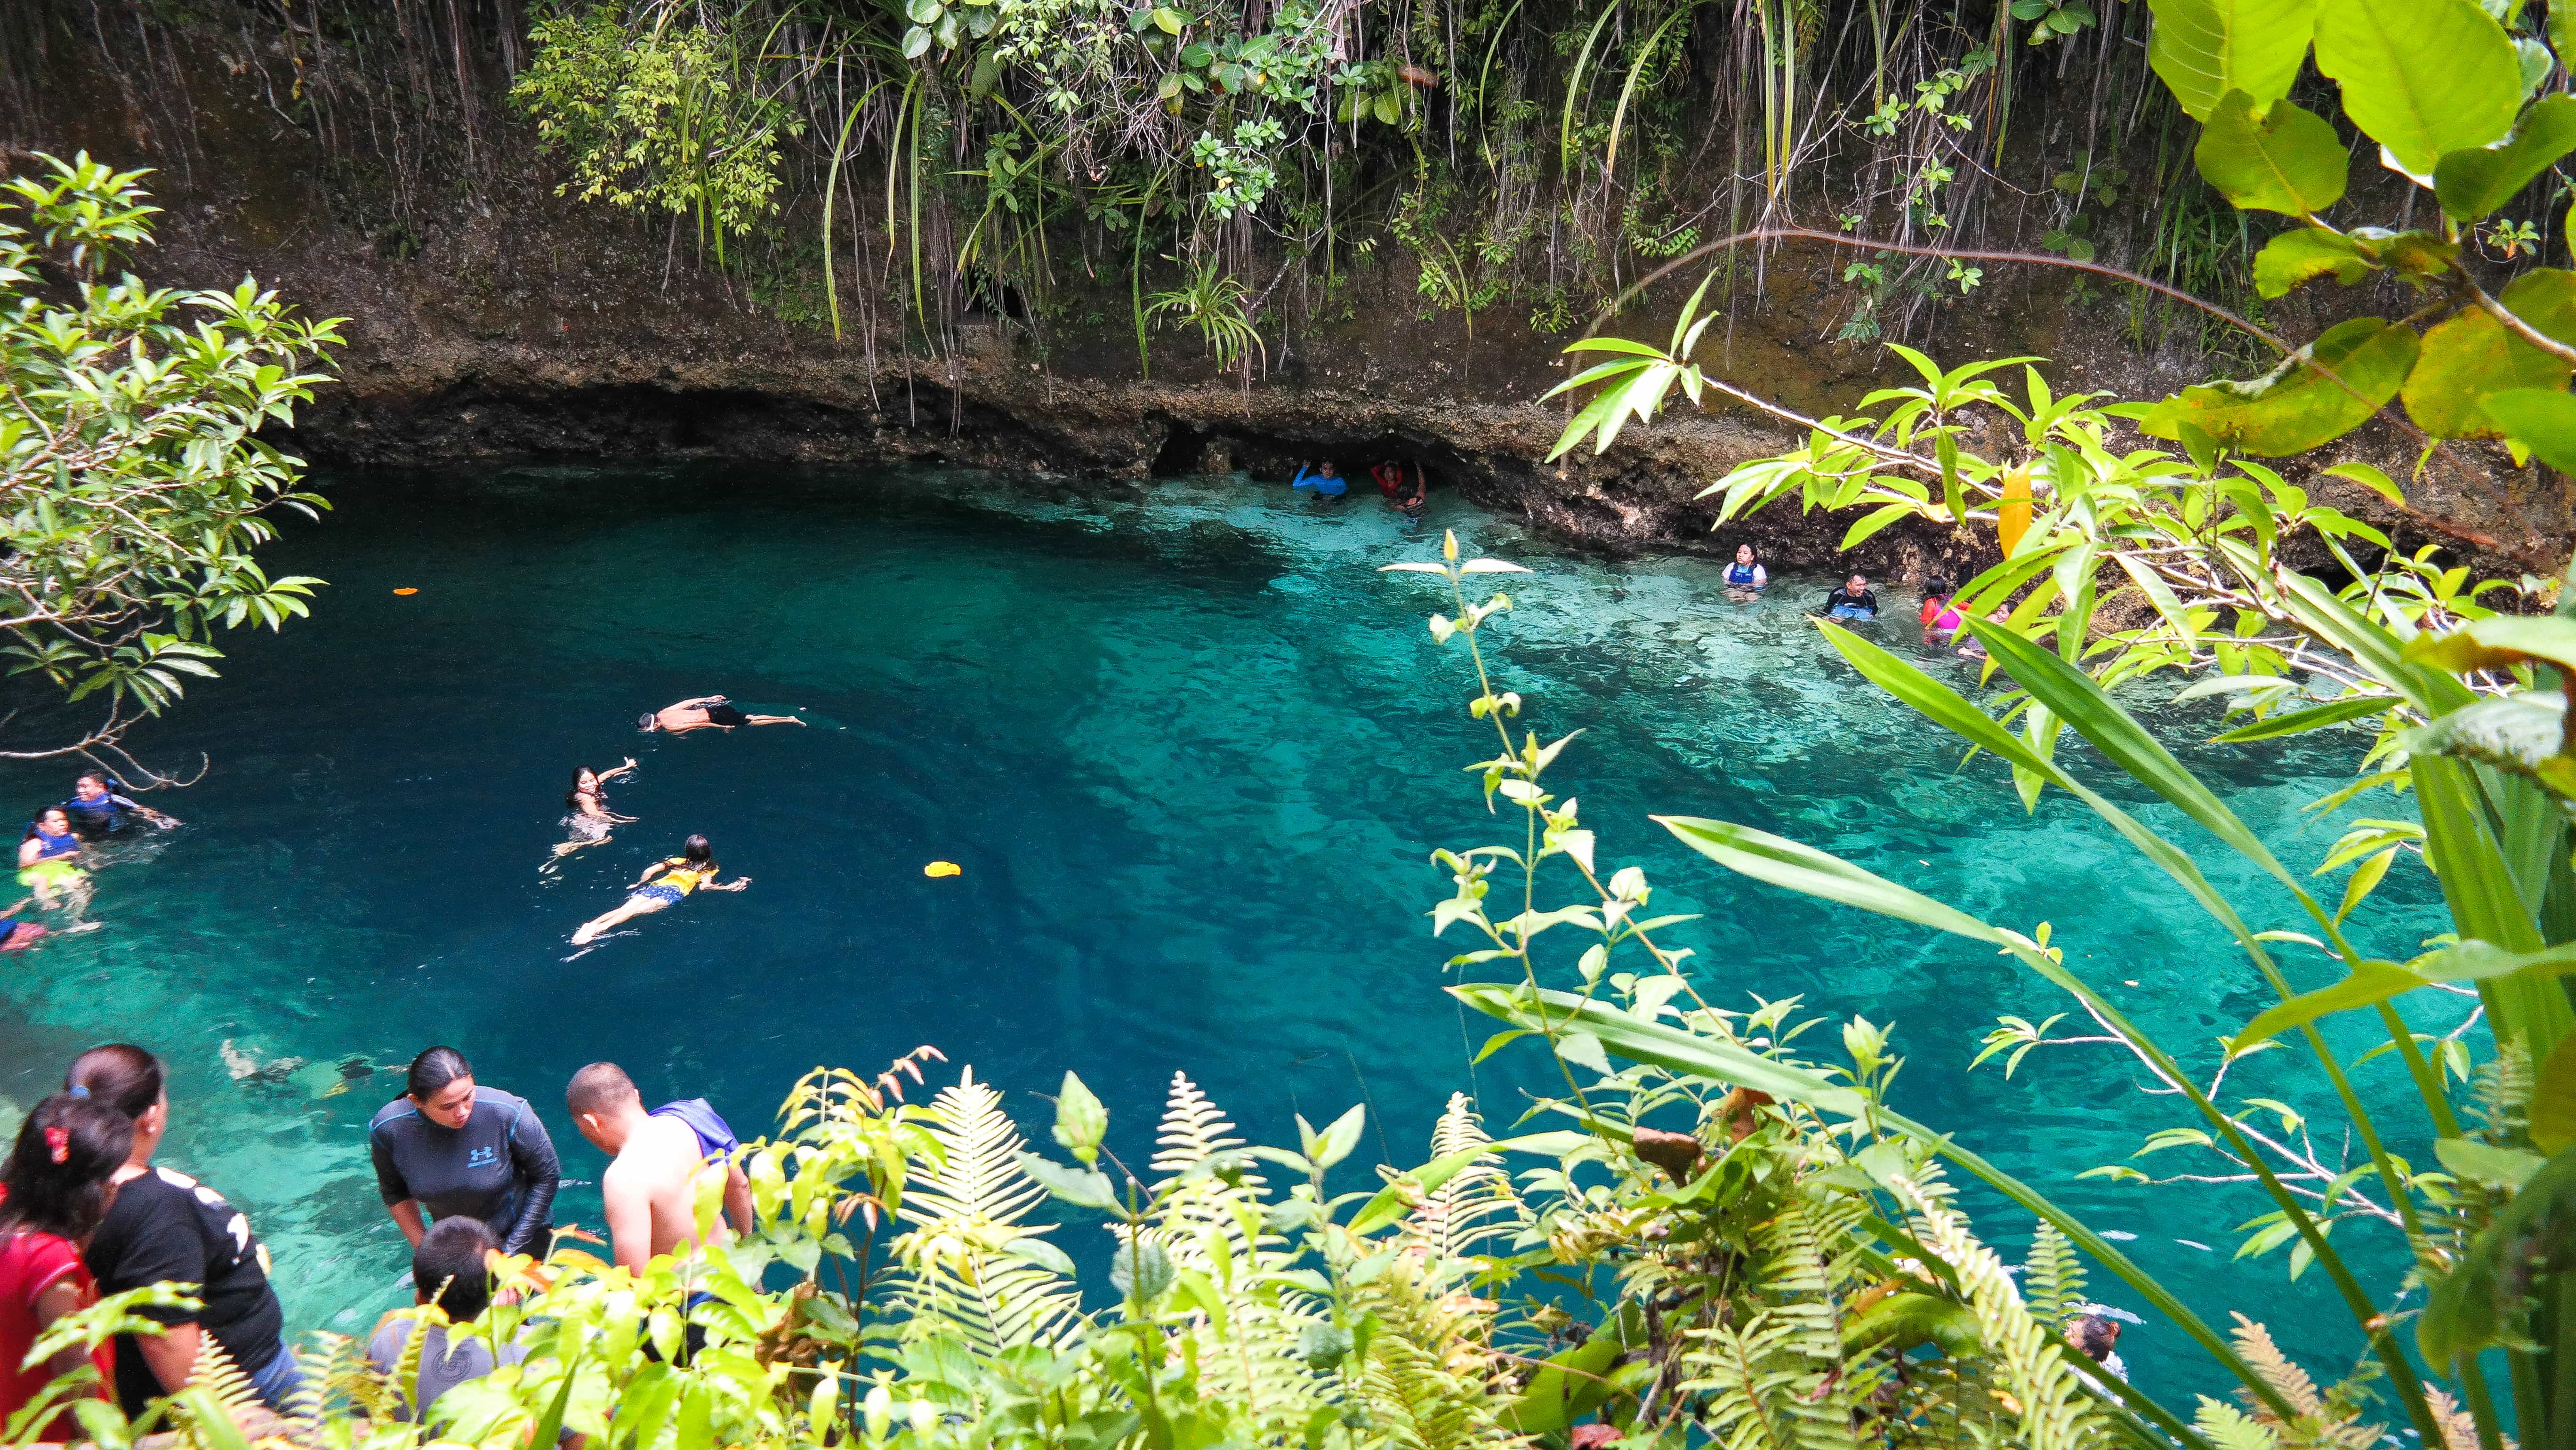 Enchanted River, tourist spots in the Philippines